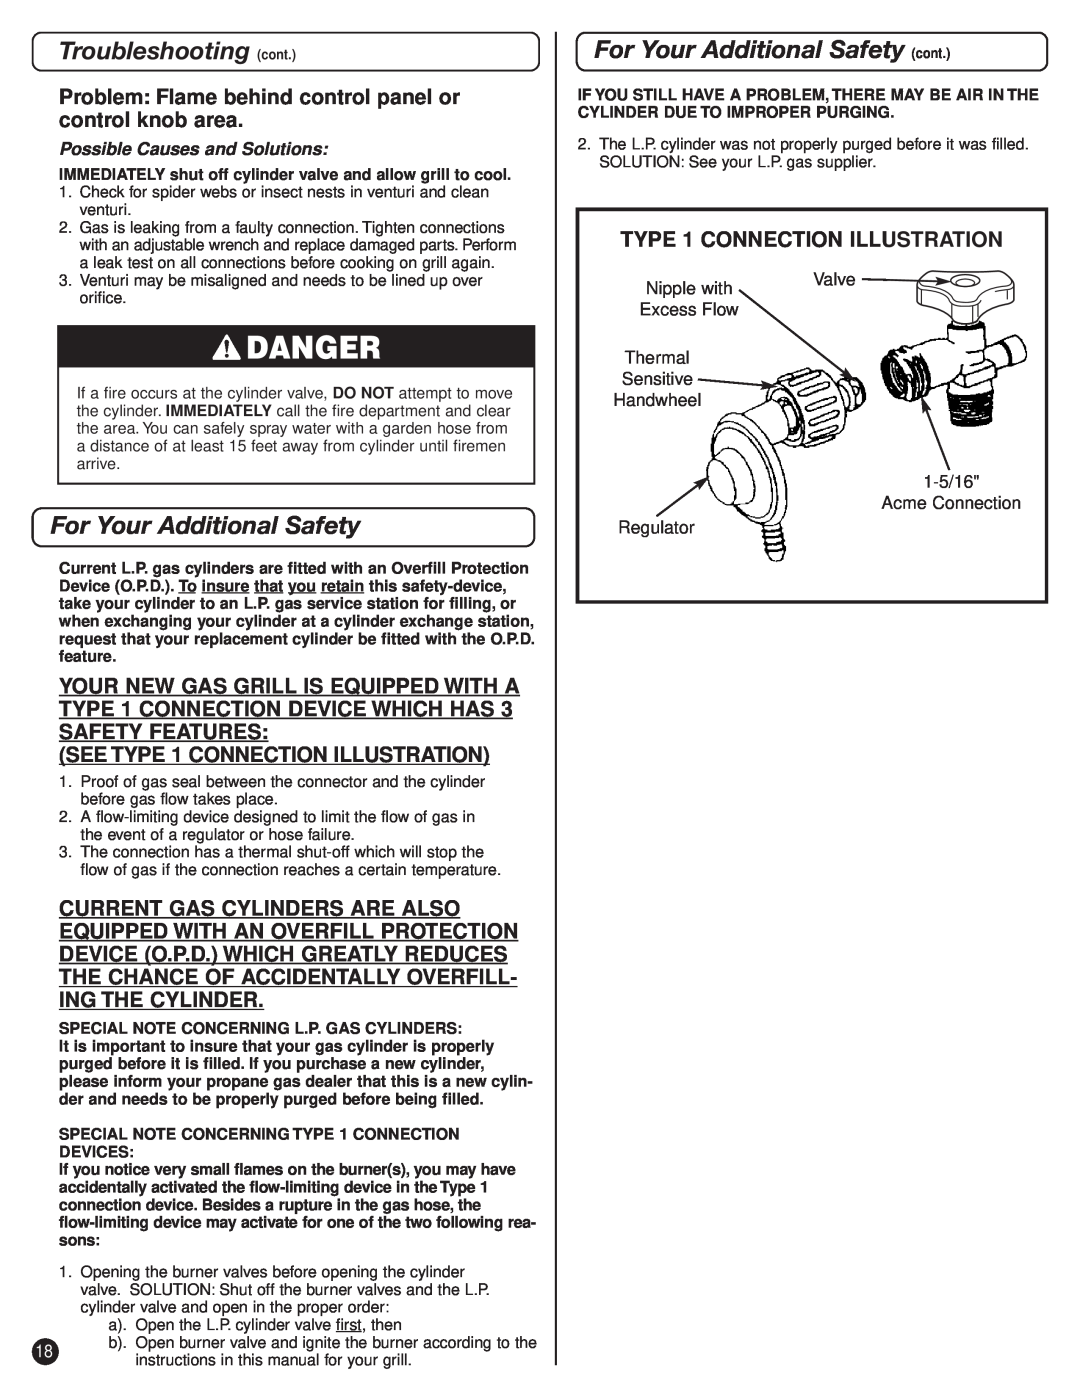 Coleman 9947A726 Troubleshooting cont, For Your Additional Safety cont, SEE TYPE 1 CONNECTION ILLUSTRATION, Danger 